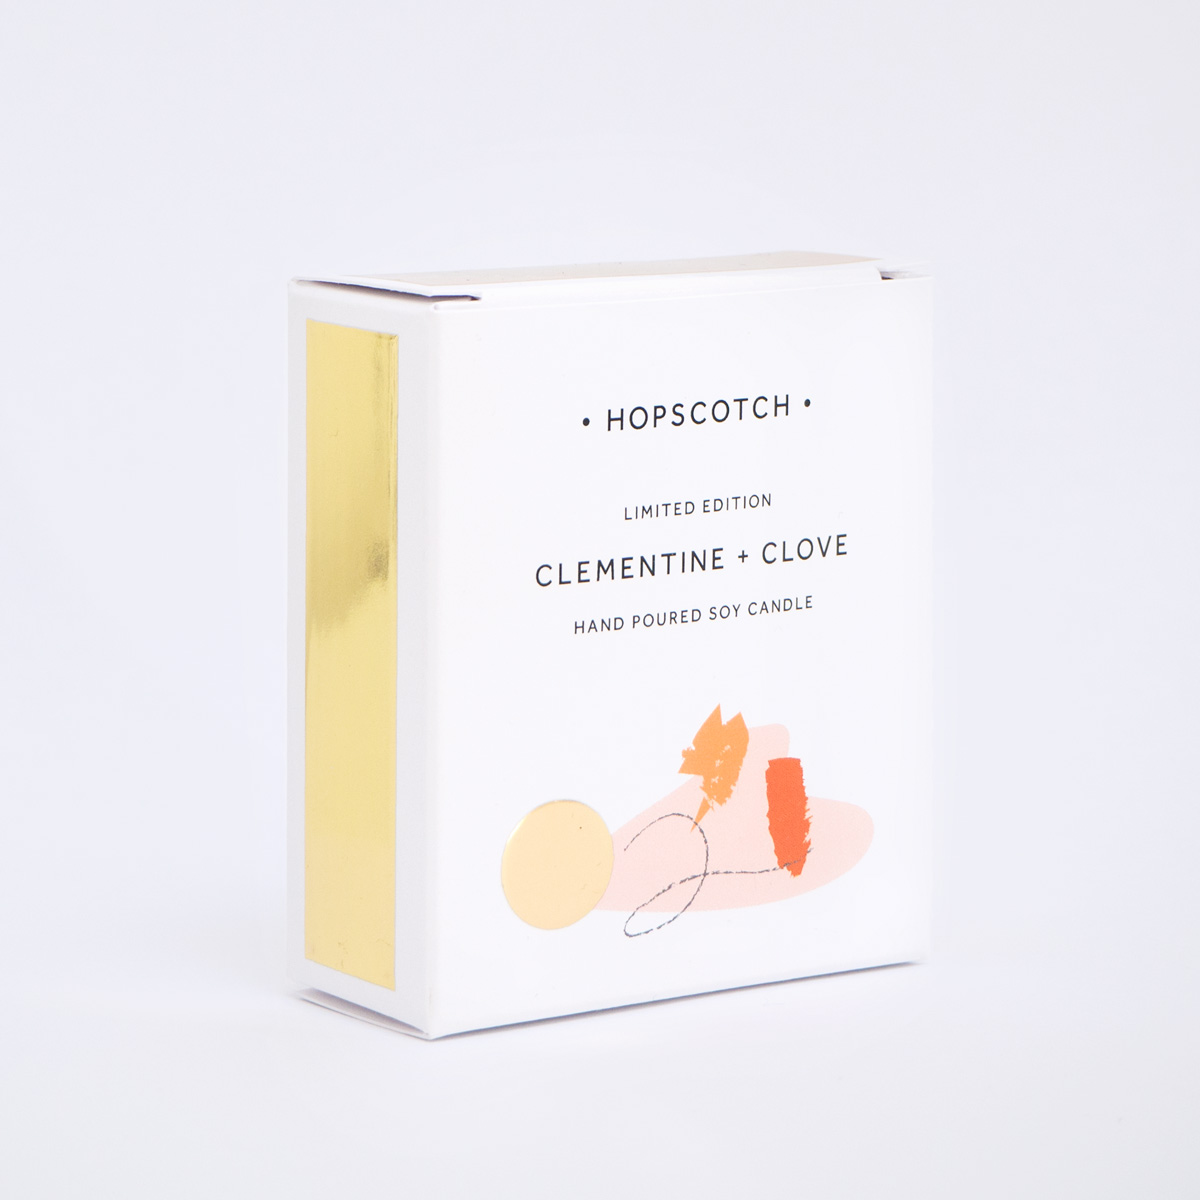 Ltd Edition Clementine + Clove Scented Soy Candle